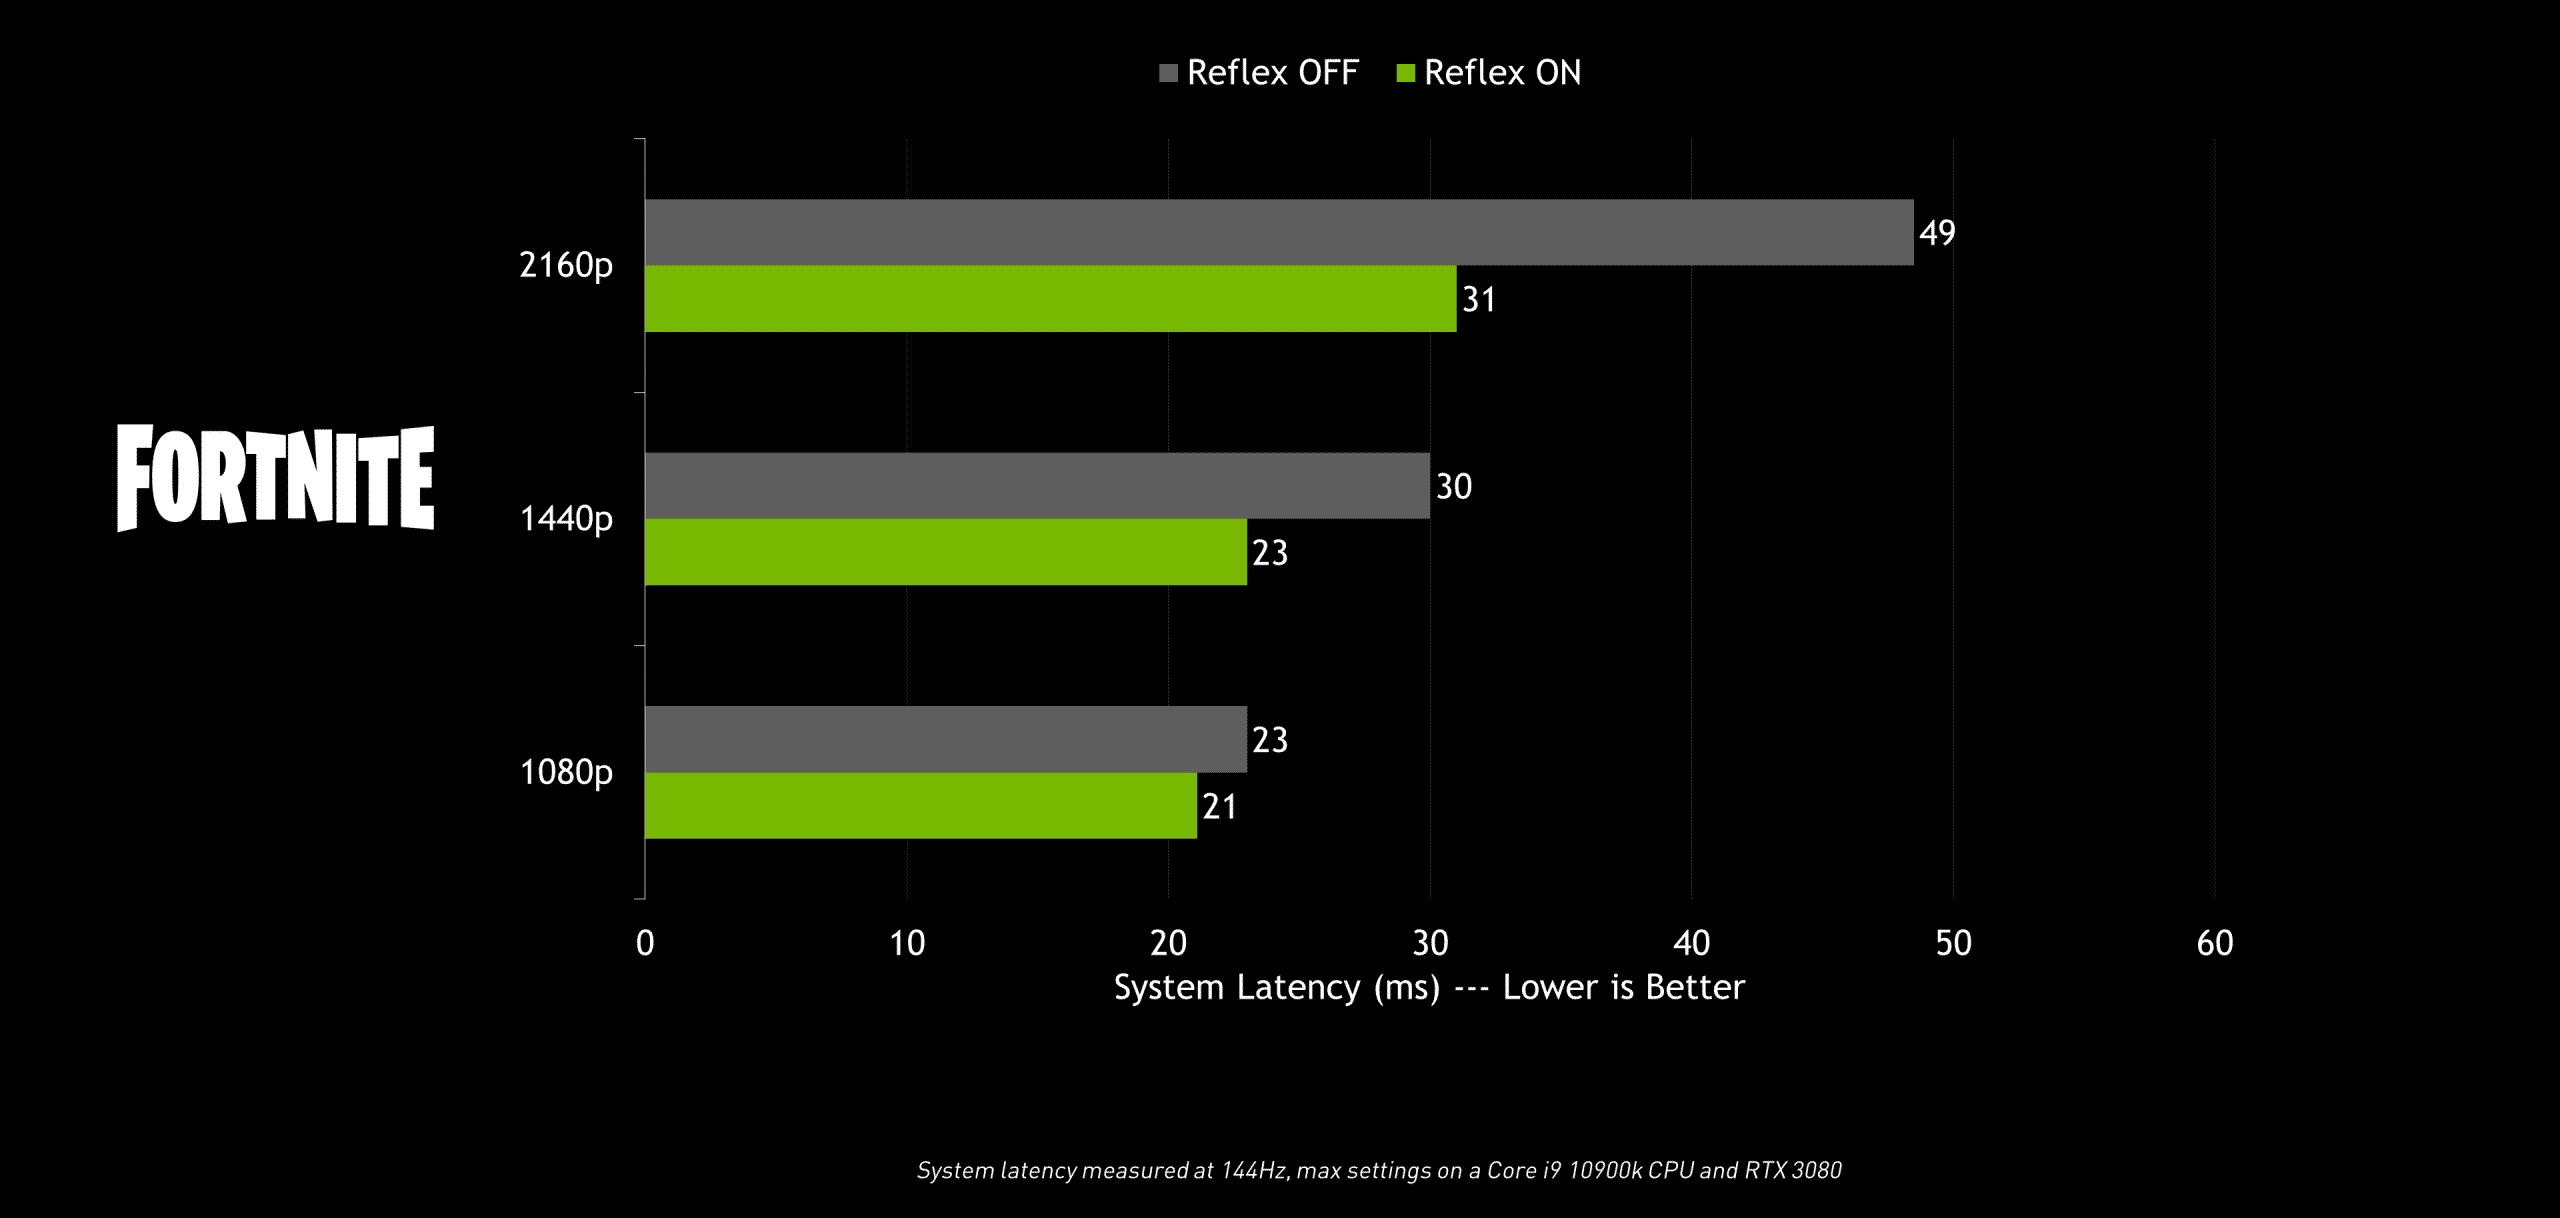 nvidia reflex on off high resolution gaming system latency performance chart